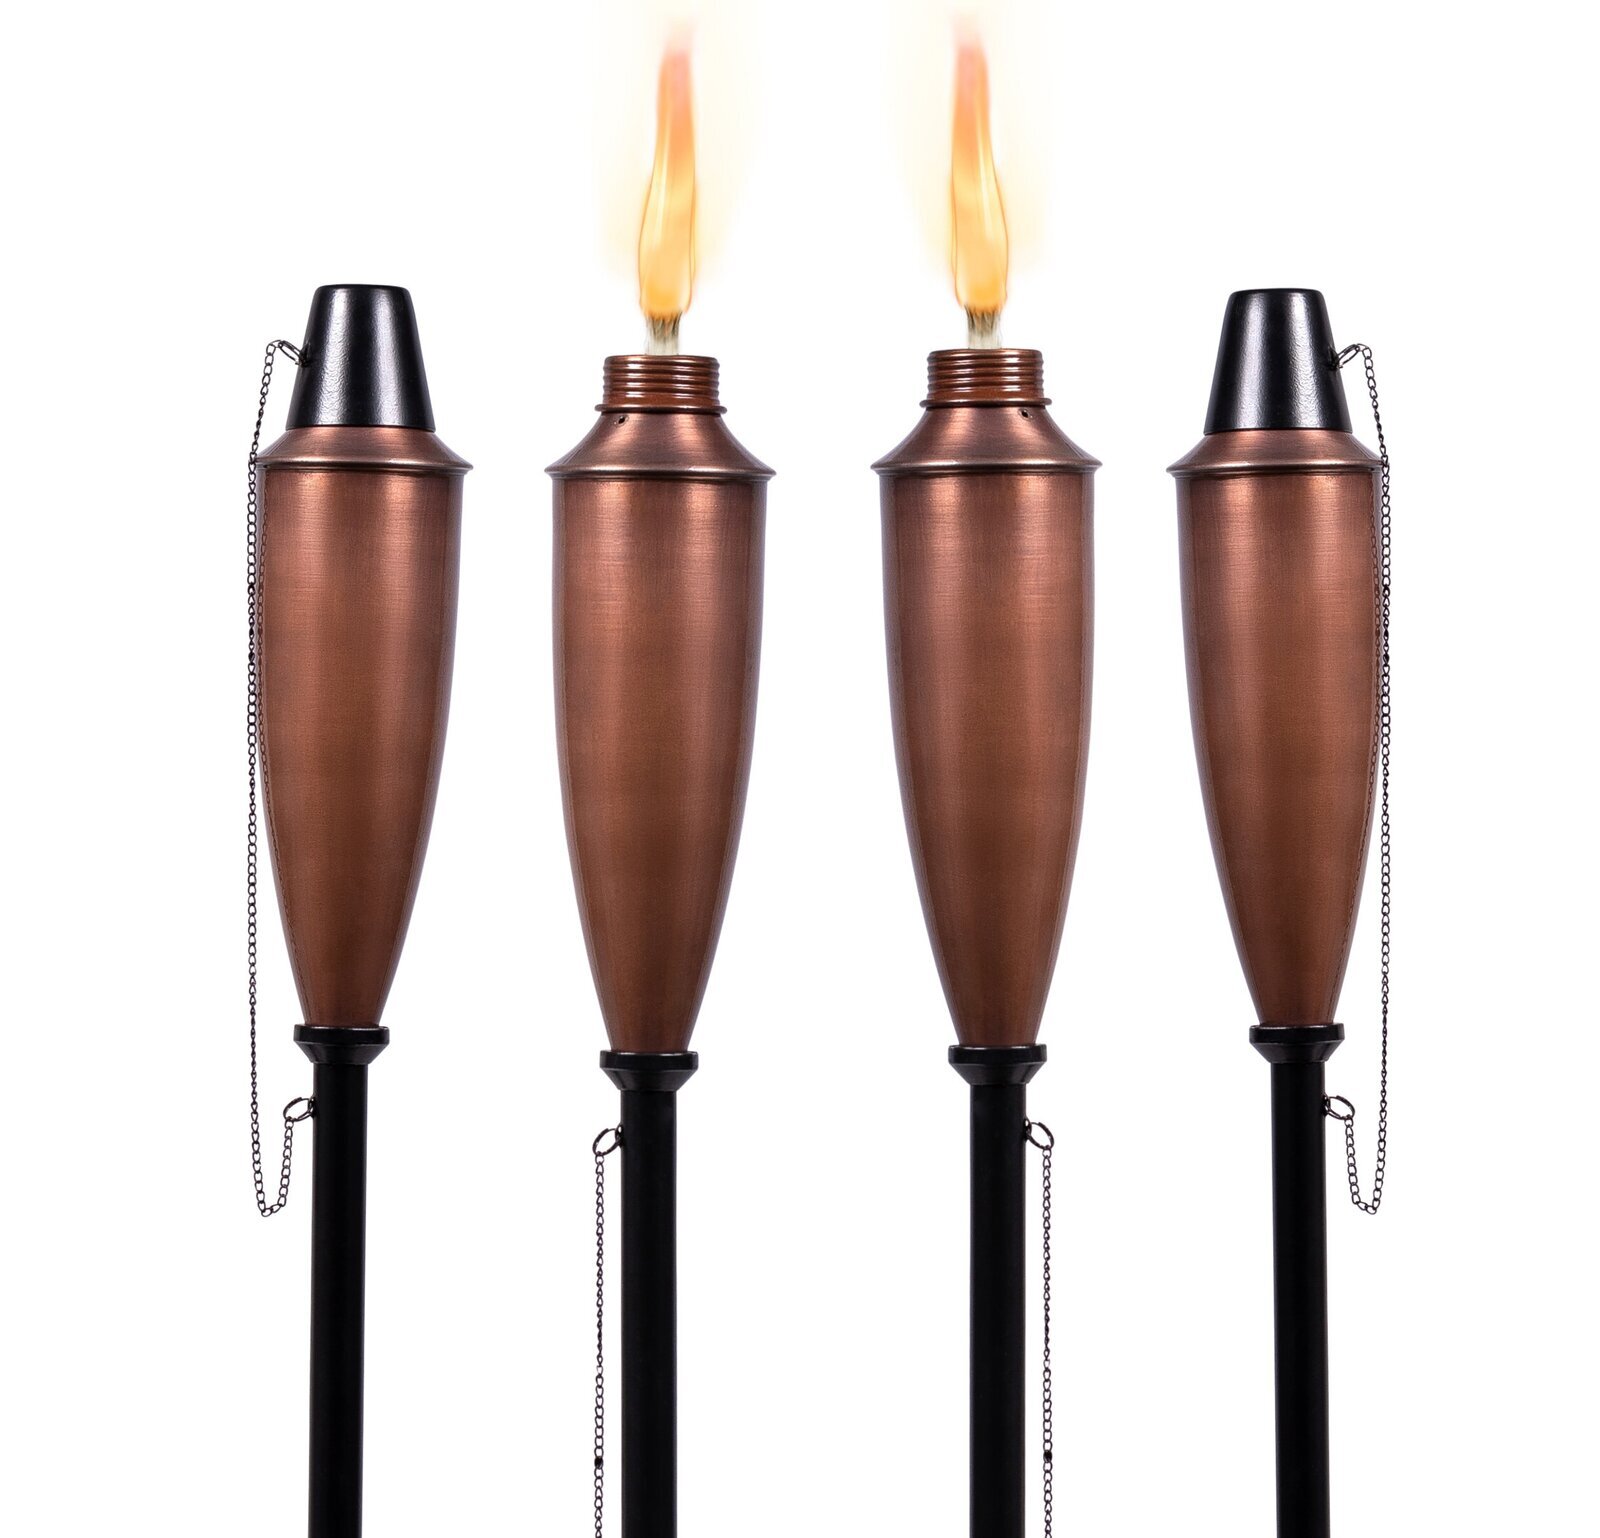 Real outdoor flame lights in a torch design